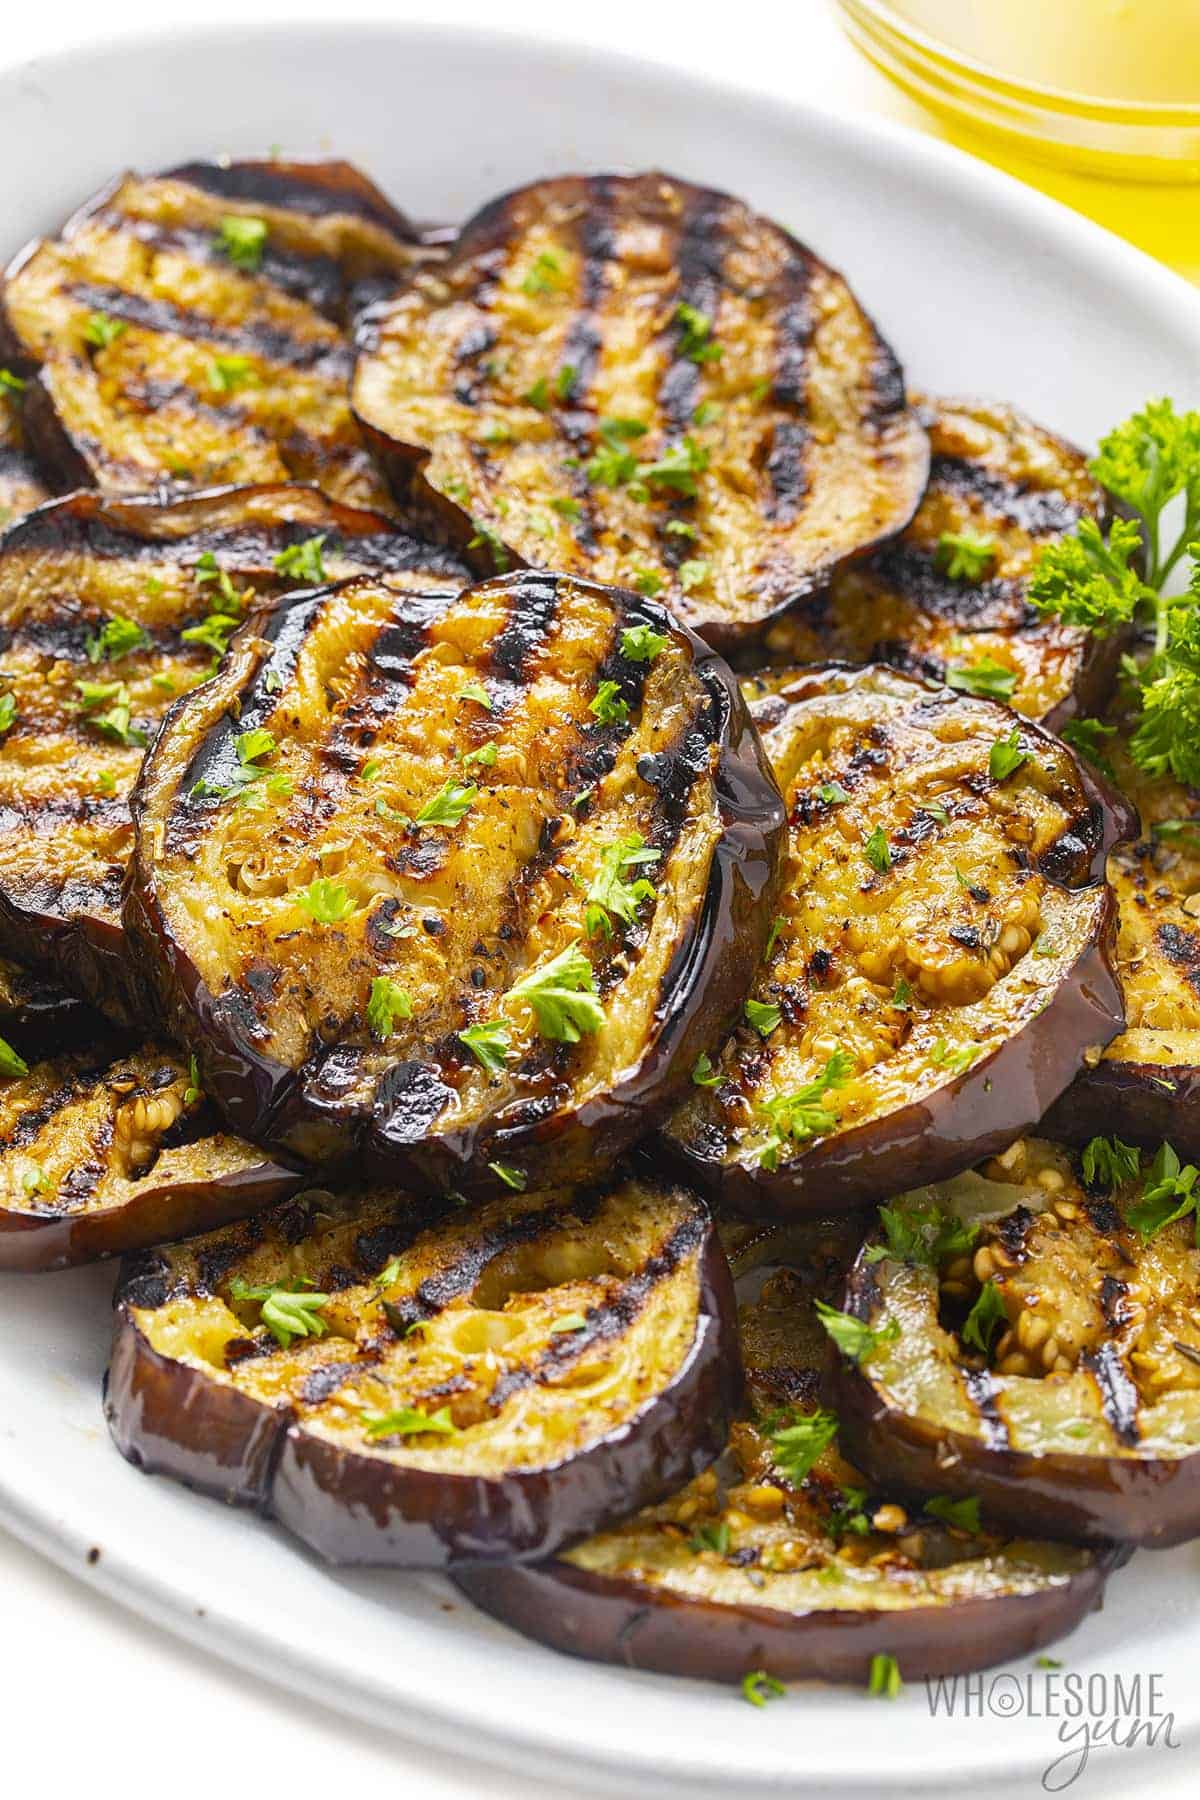 Eggplant with grill marks on a serving platter.